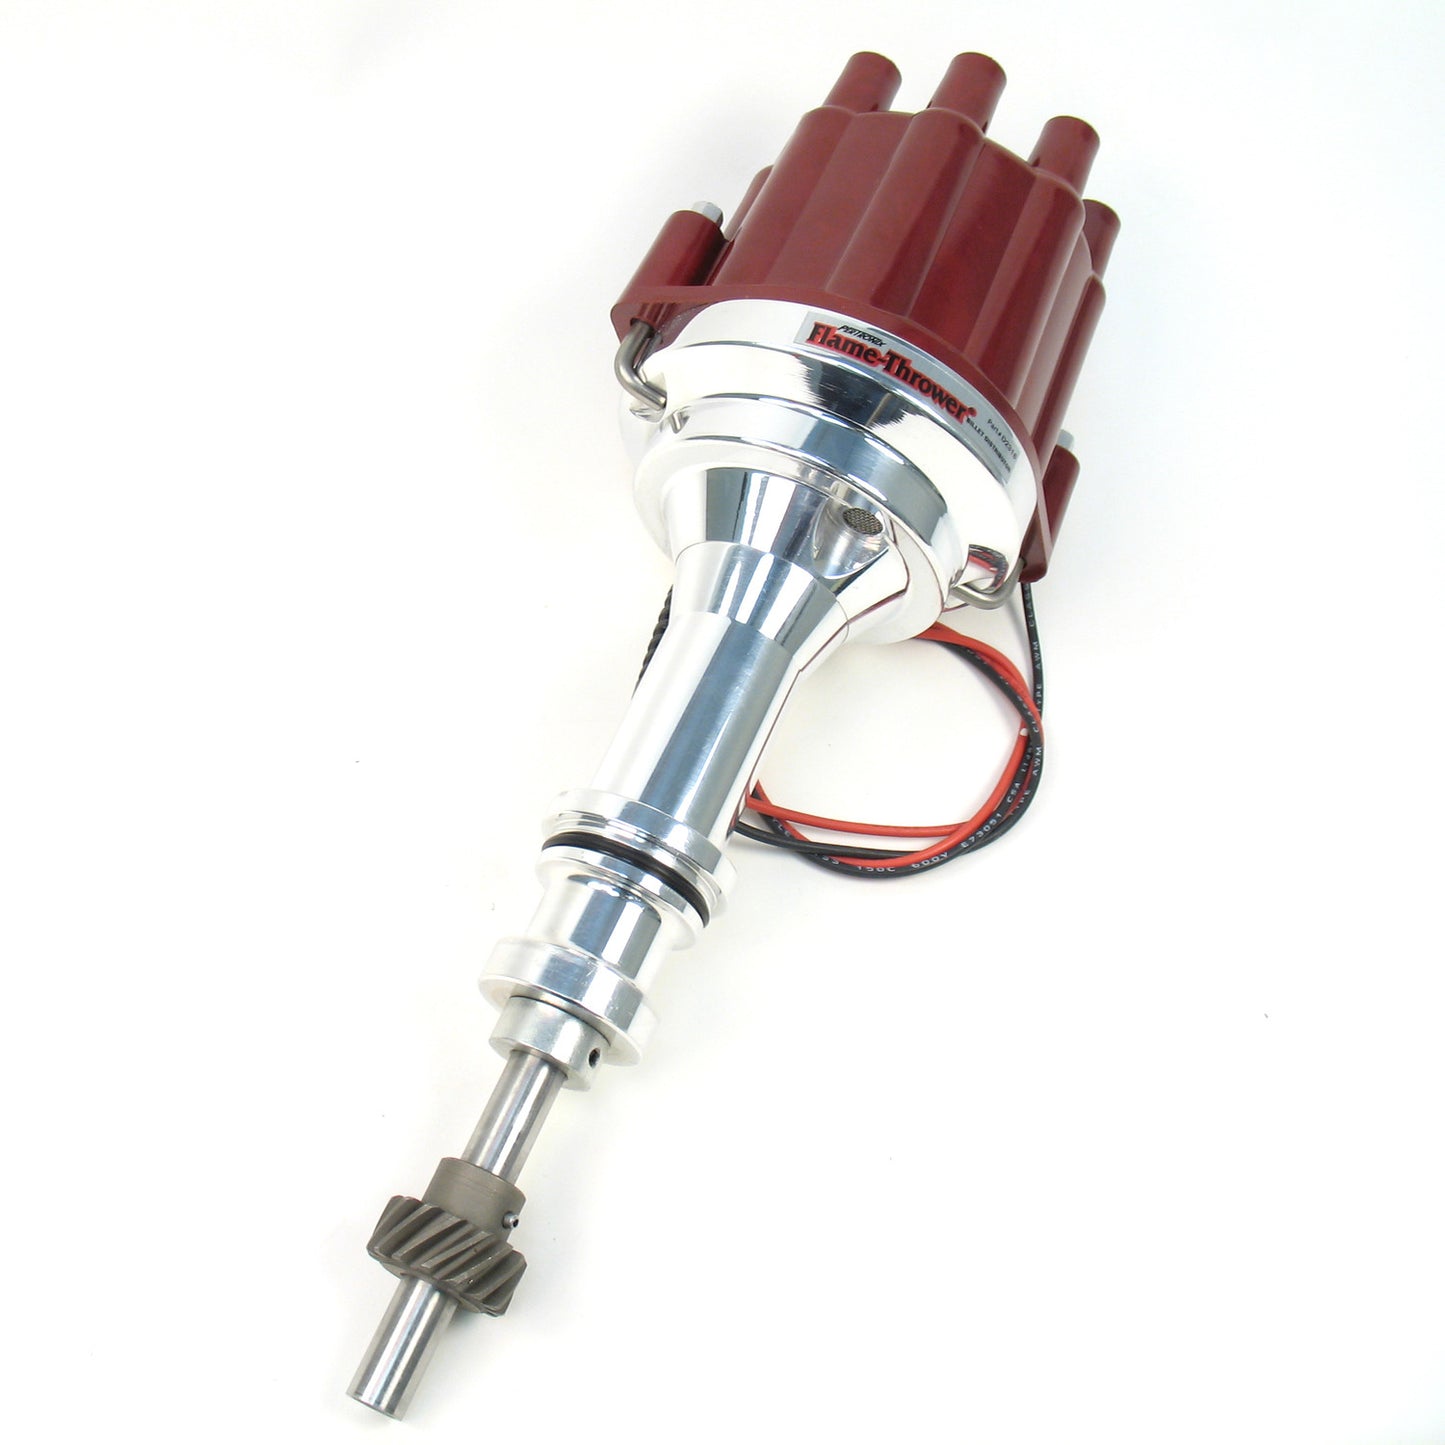 PerTronix D231801 Flame-Thrower Electronic Distributor Billet Marine Ford 351W Plug and Play with Ignitor II Red Cap